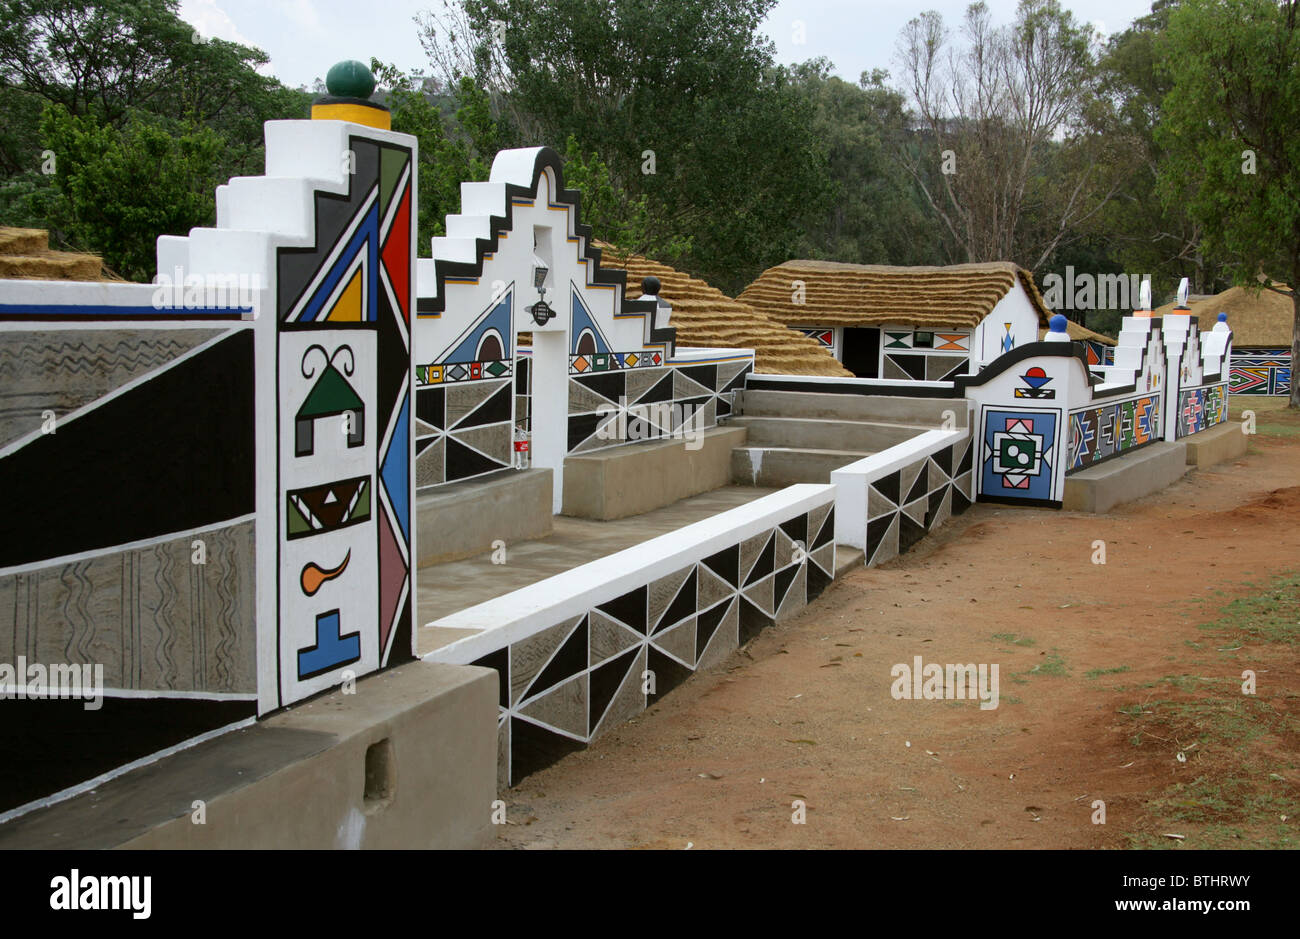 Ndebele Cultural Village, Botshabelo, South Africa. Stock Photo